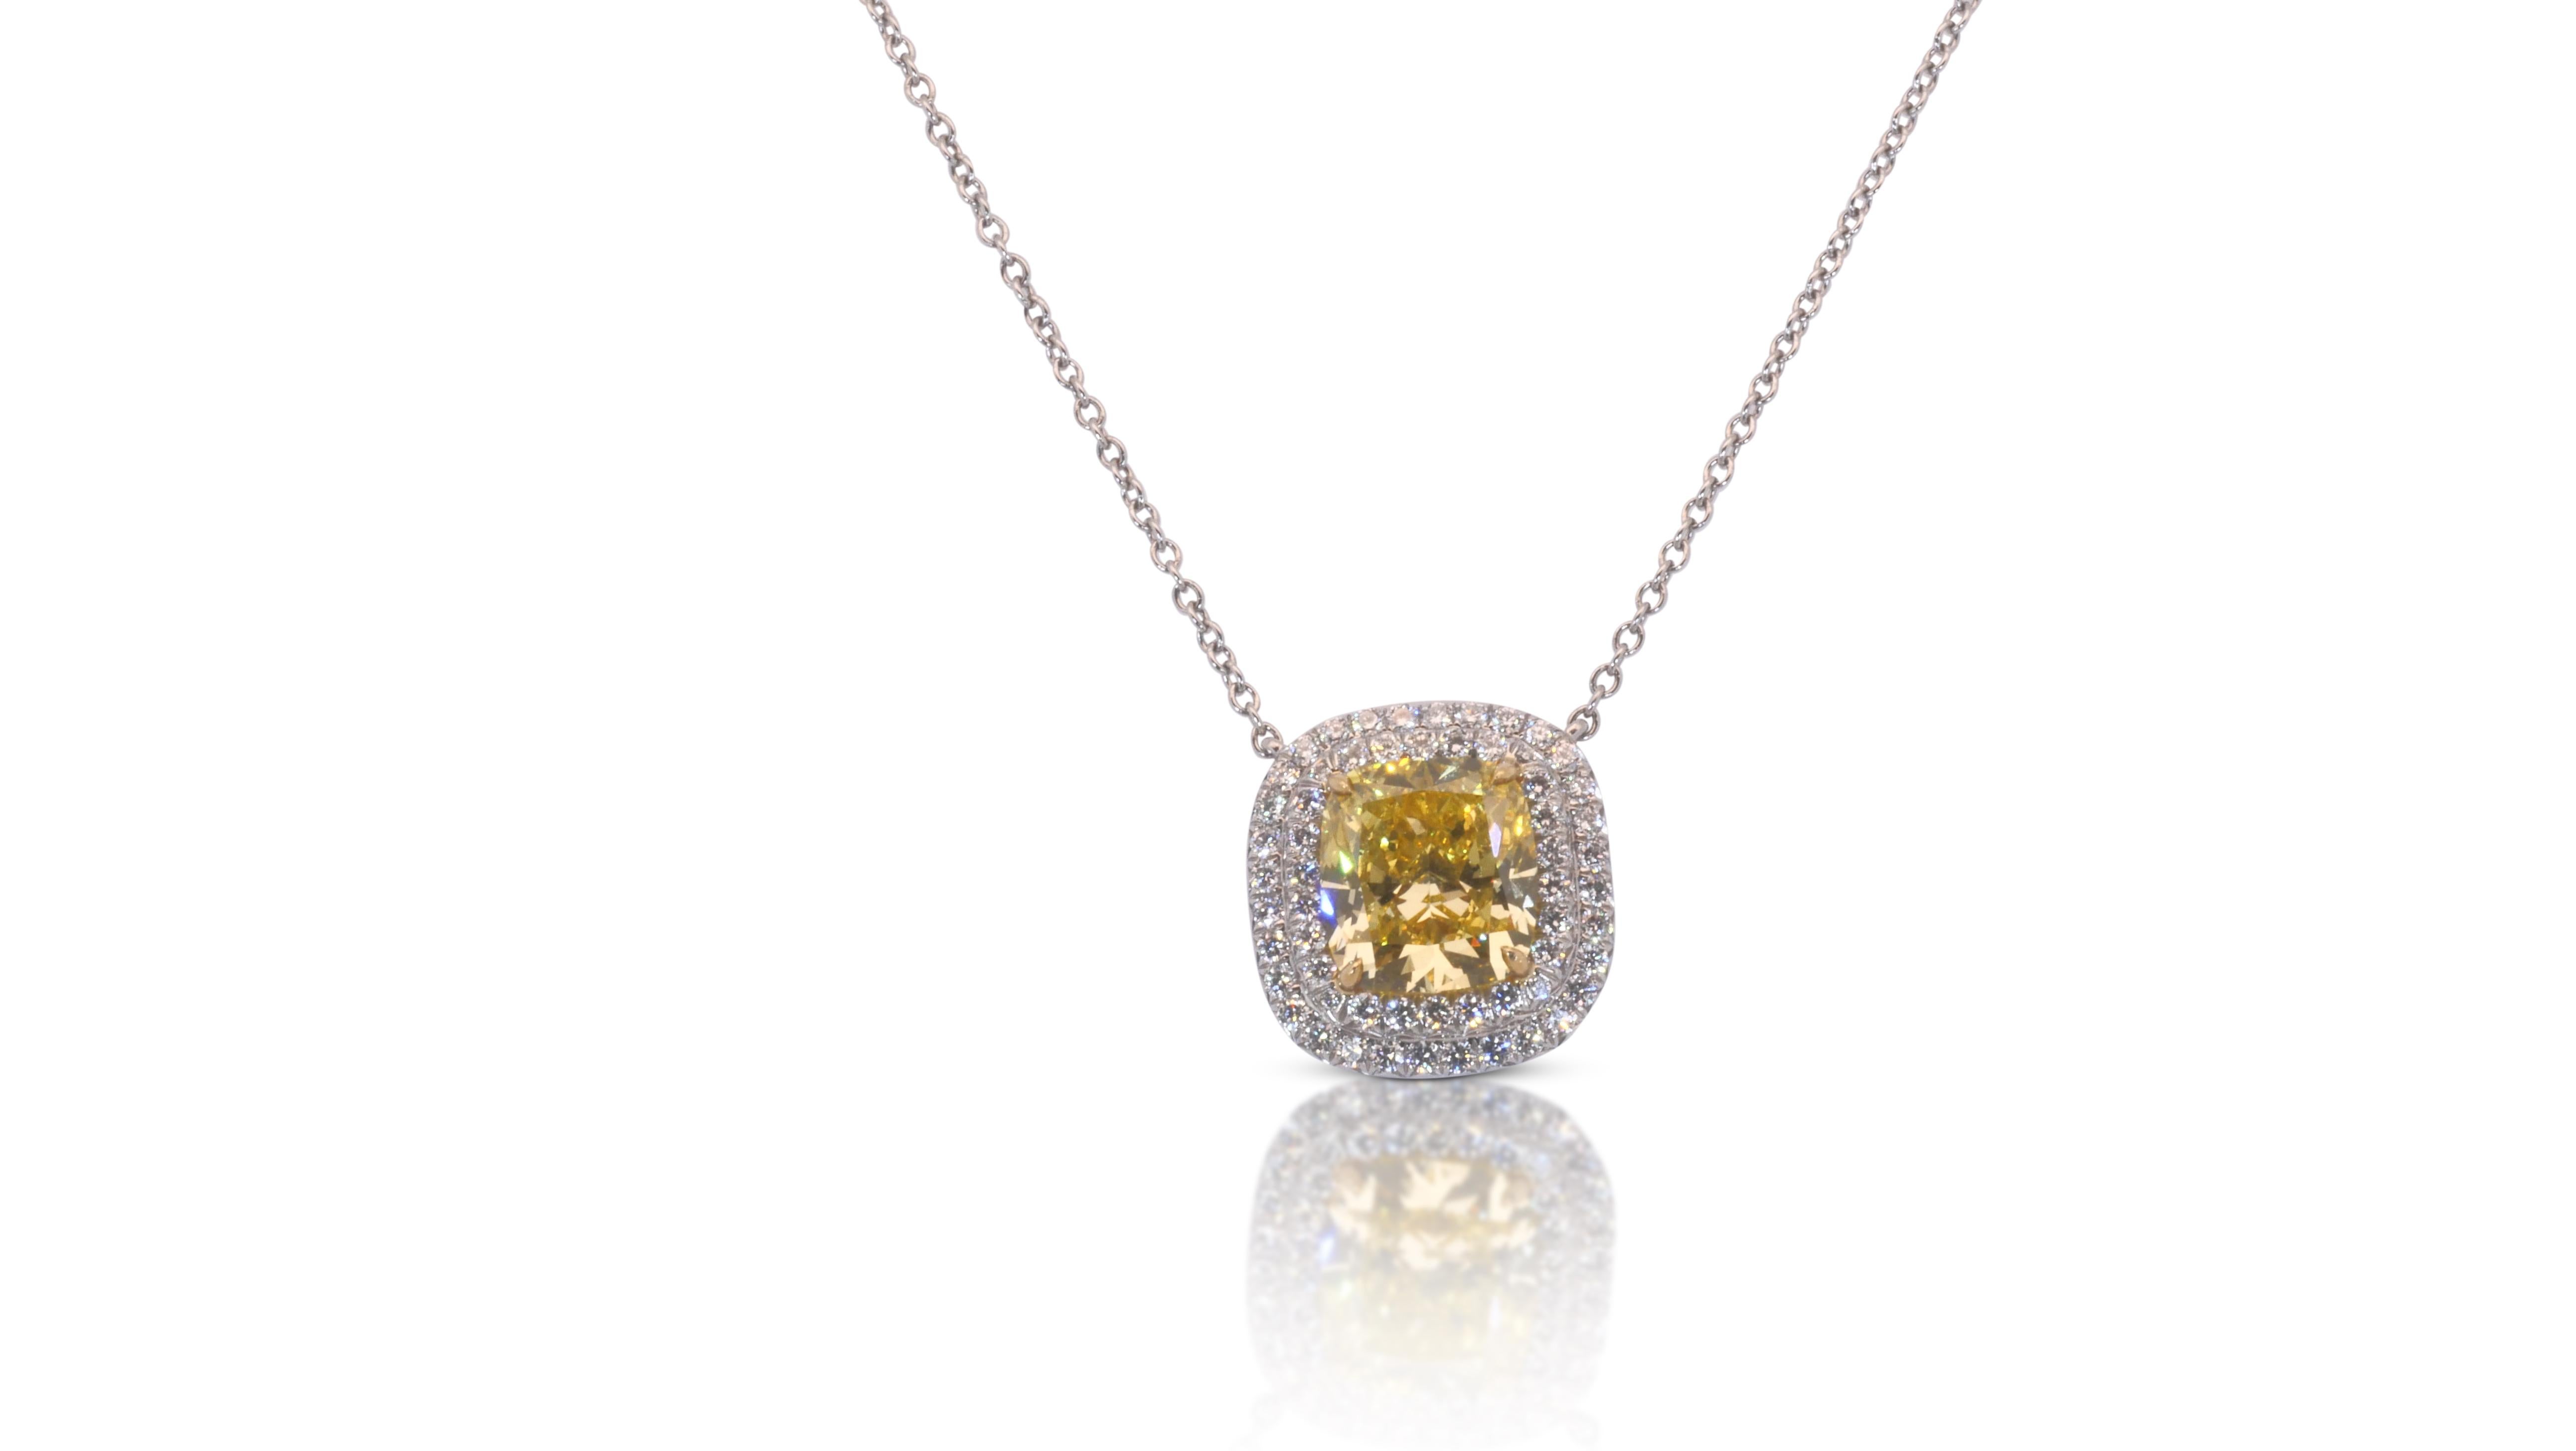 A beautiful necklace with pendant with a dazzling 2.56 carat cushion natural diamond. It has 0.7 carat of side diamonds which add more to its elegance. The jewelry is made of18k White Gold Chain and a Platinum Pendant with a high quality polish. It